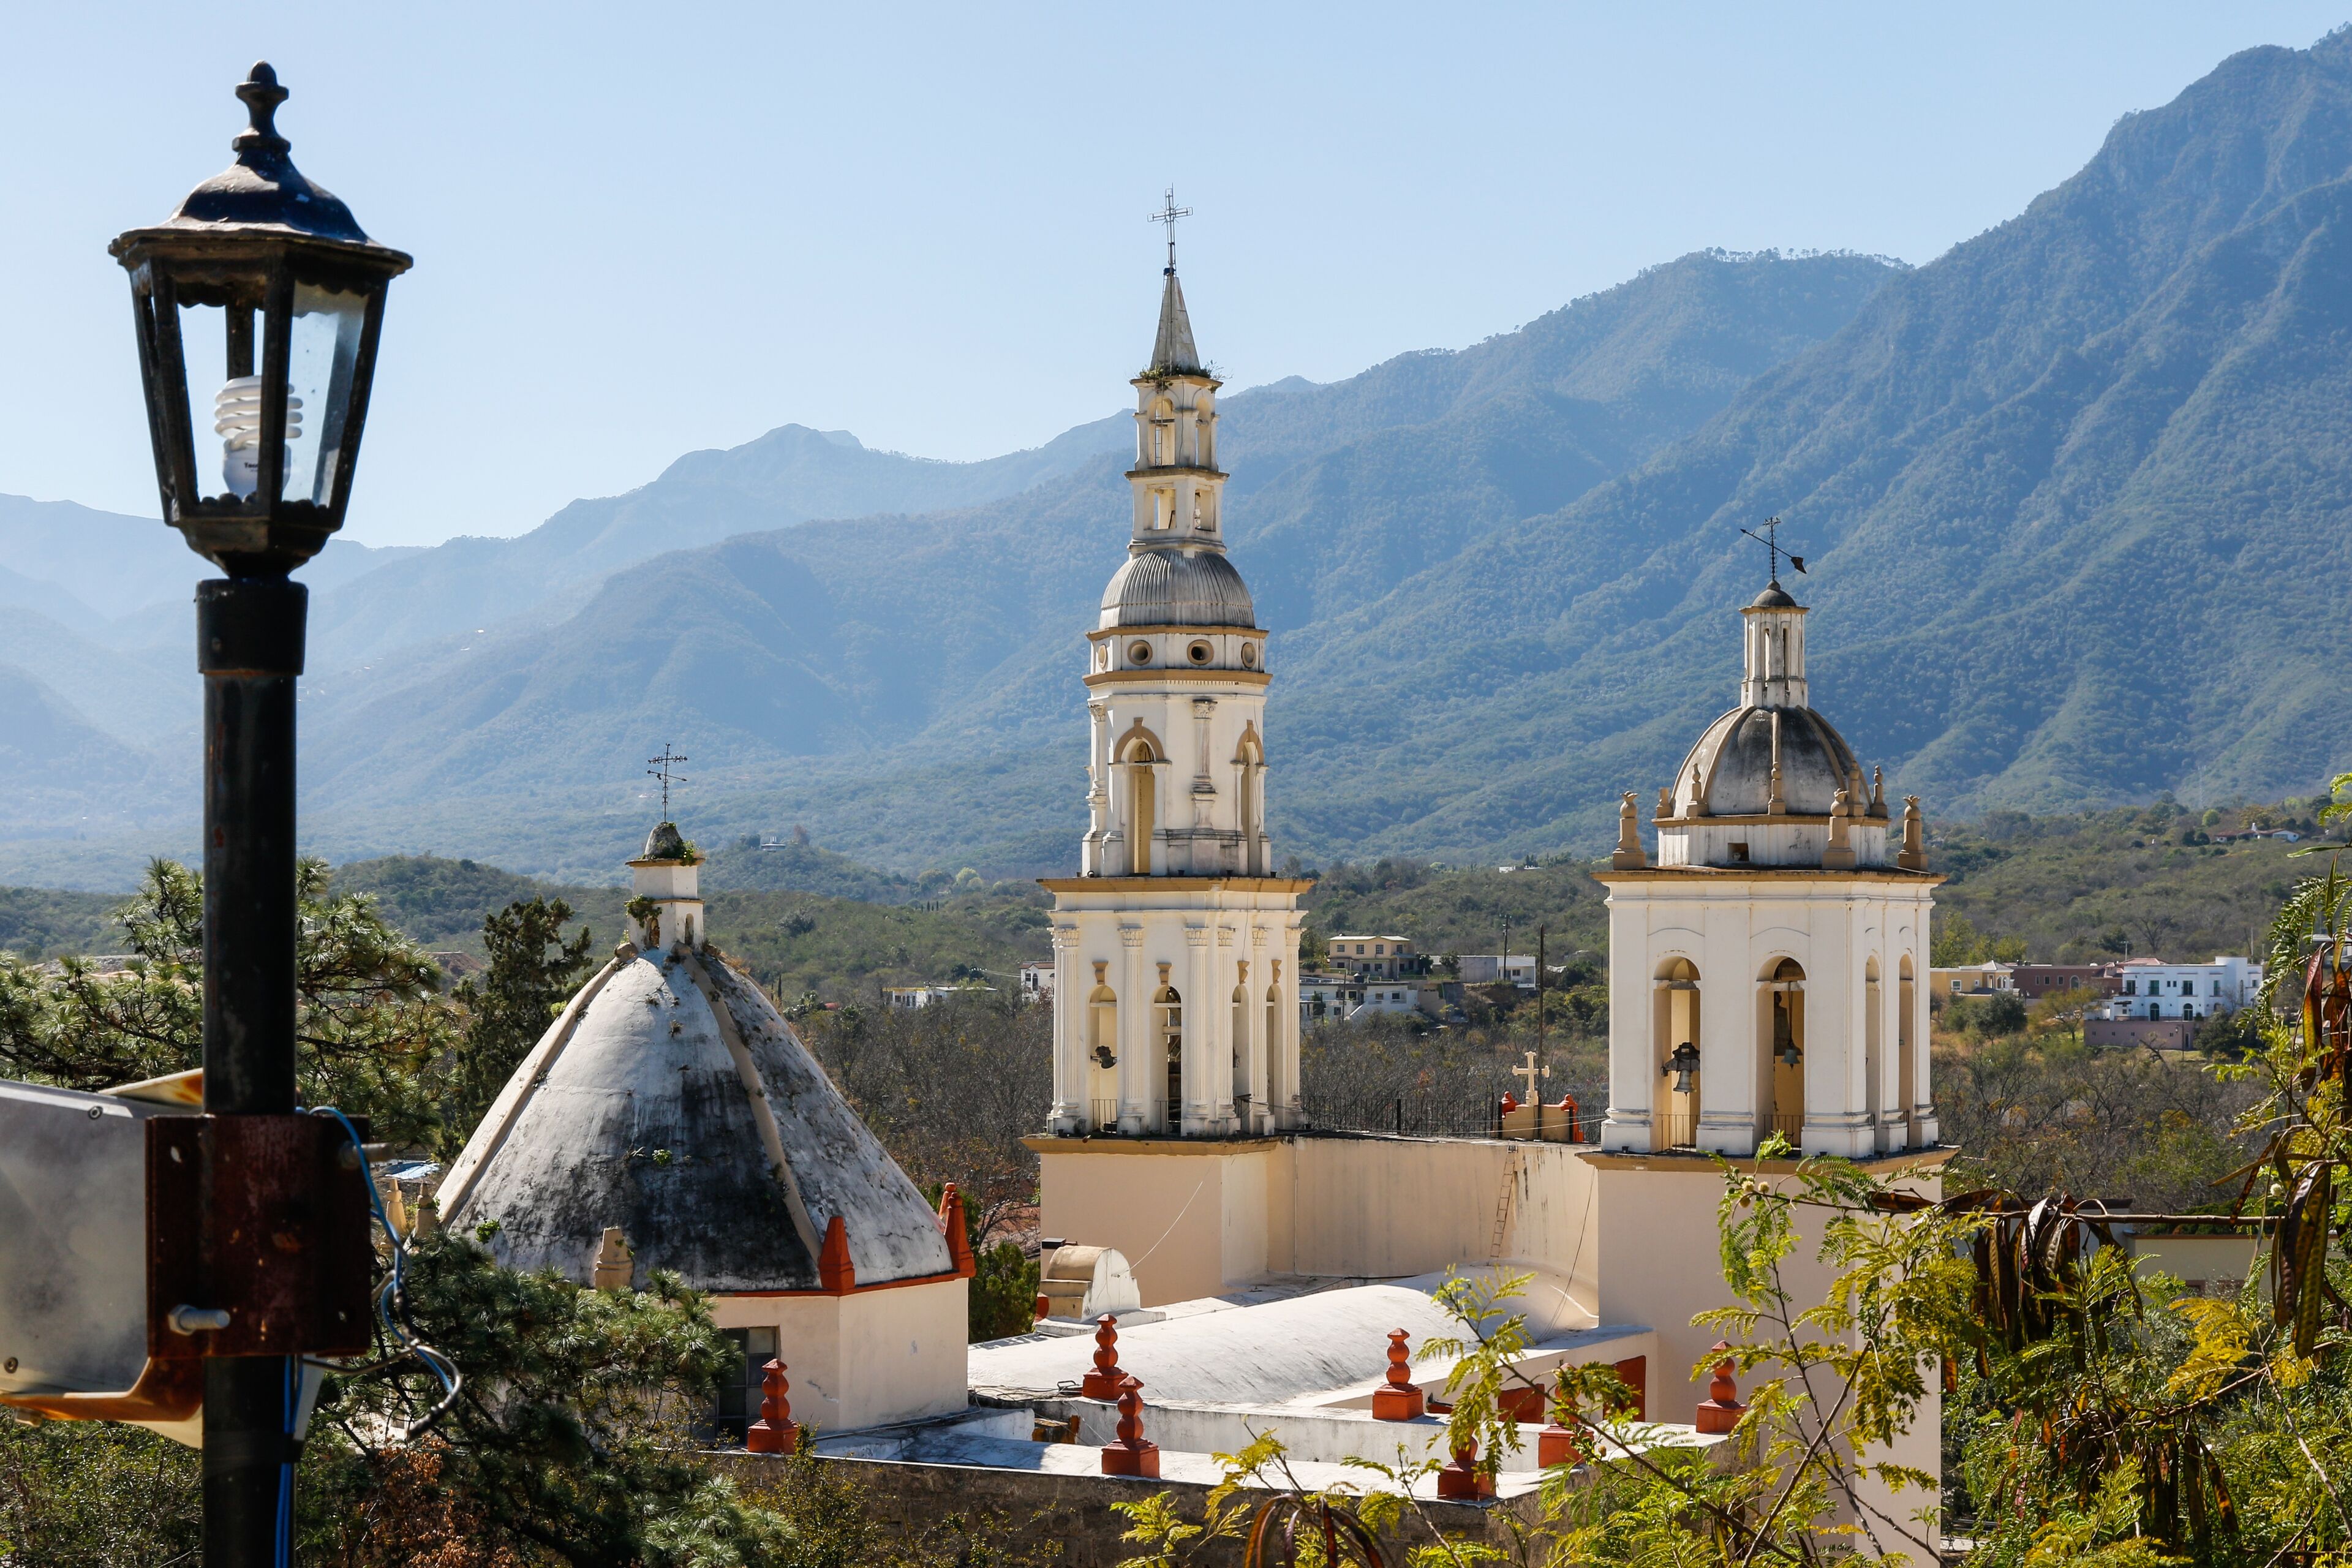 The Rodrigo Gómez Reservoir is located in front of the town of Santiago, very close to Monterrey, Mexico. Santiago is considered a "Mexican Magical Town", which are towns that are given a larger push in tourism by the Tourism Ministry. Here we see a view of Santiago Apostol Church, which is about 300 years old.